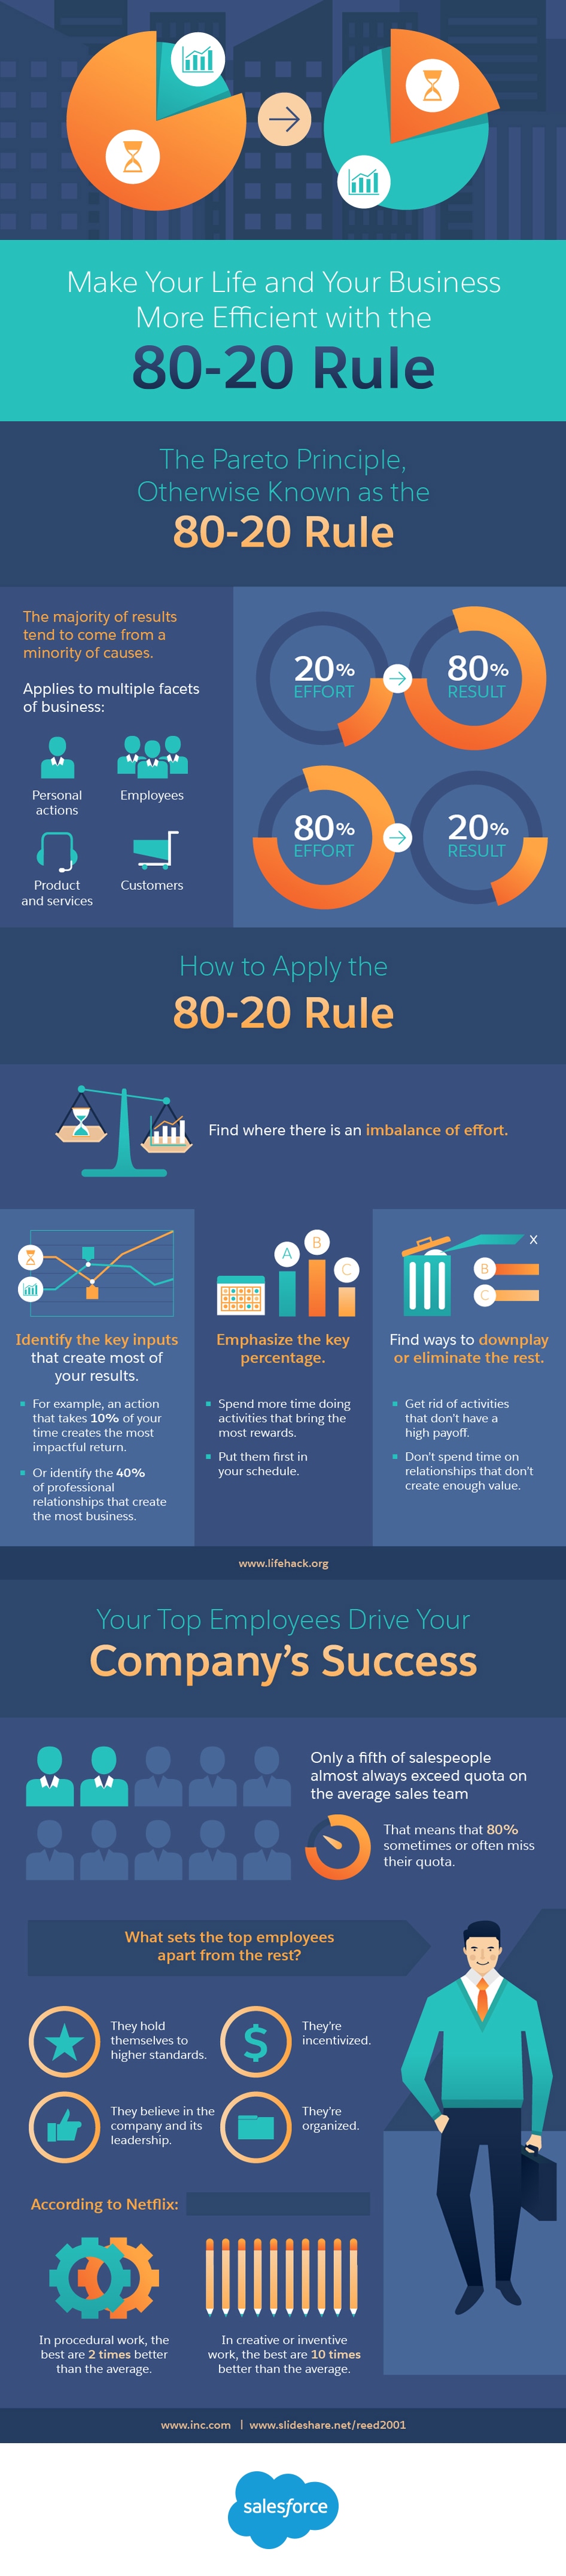 Make Your Life and Your Business More Efficient with the 80-20 Rule